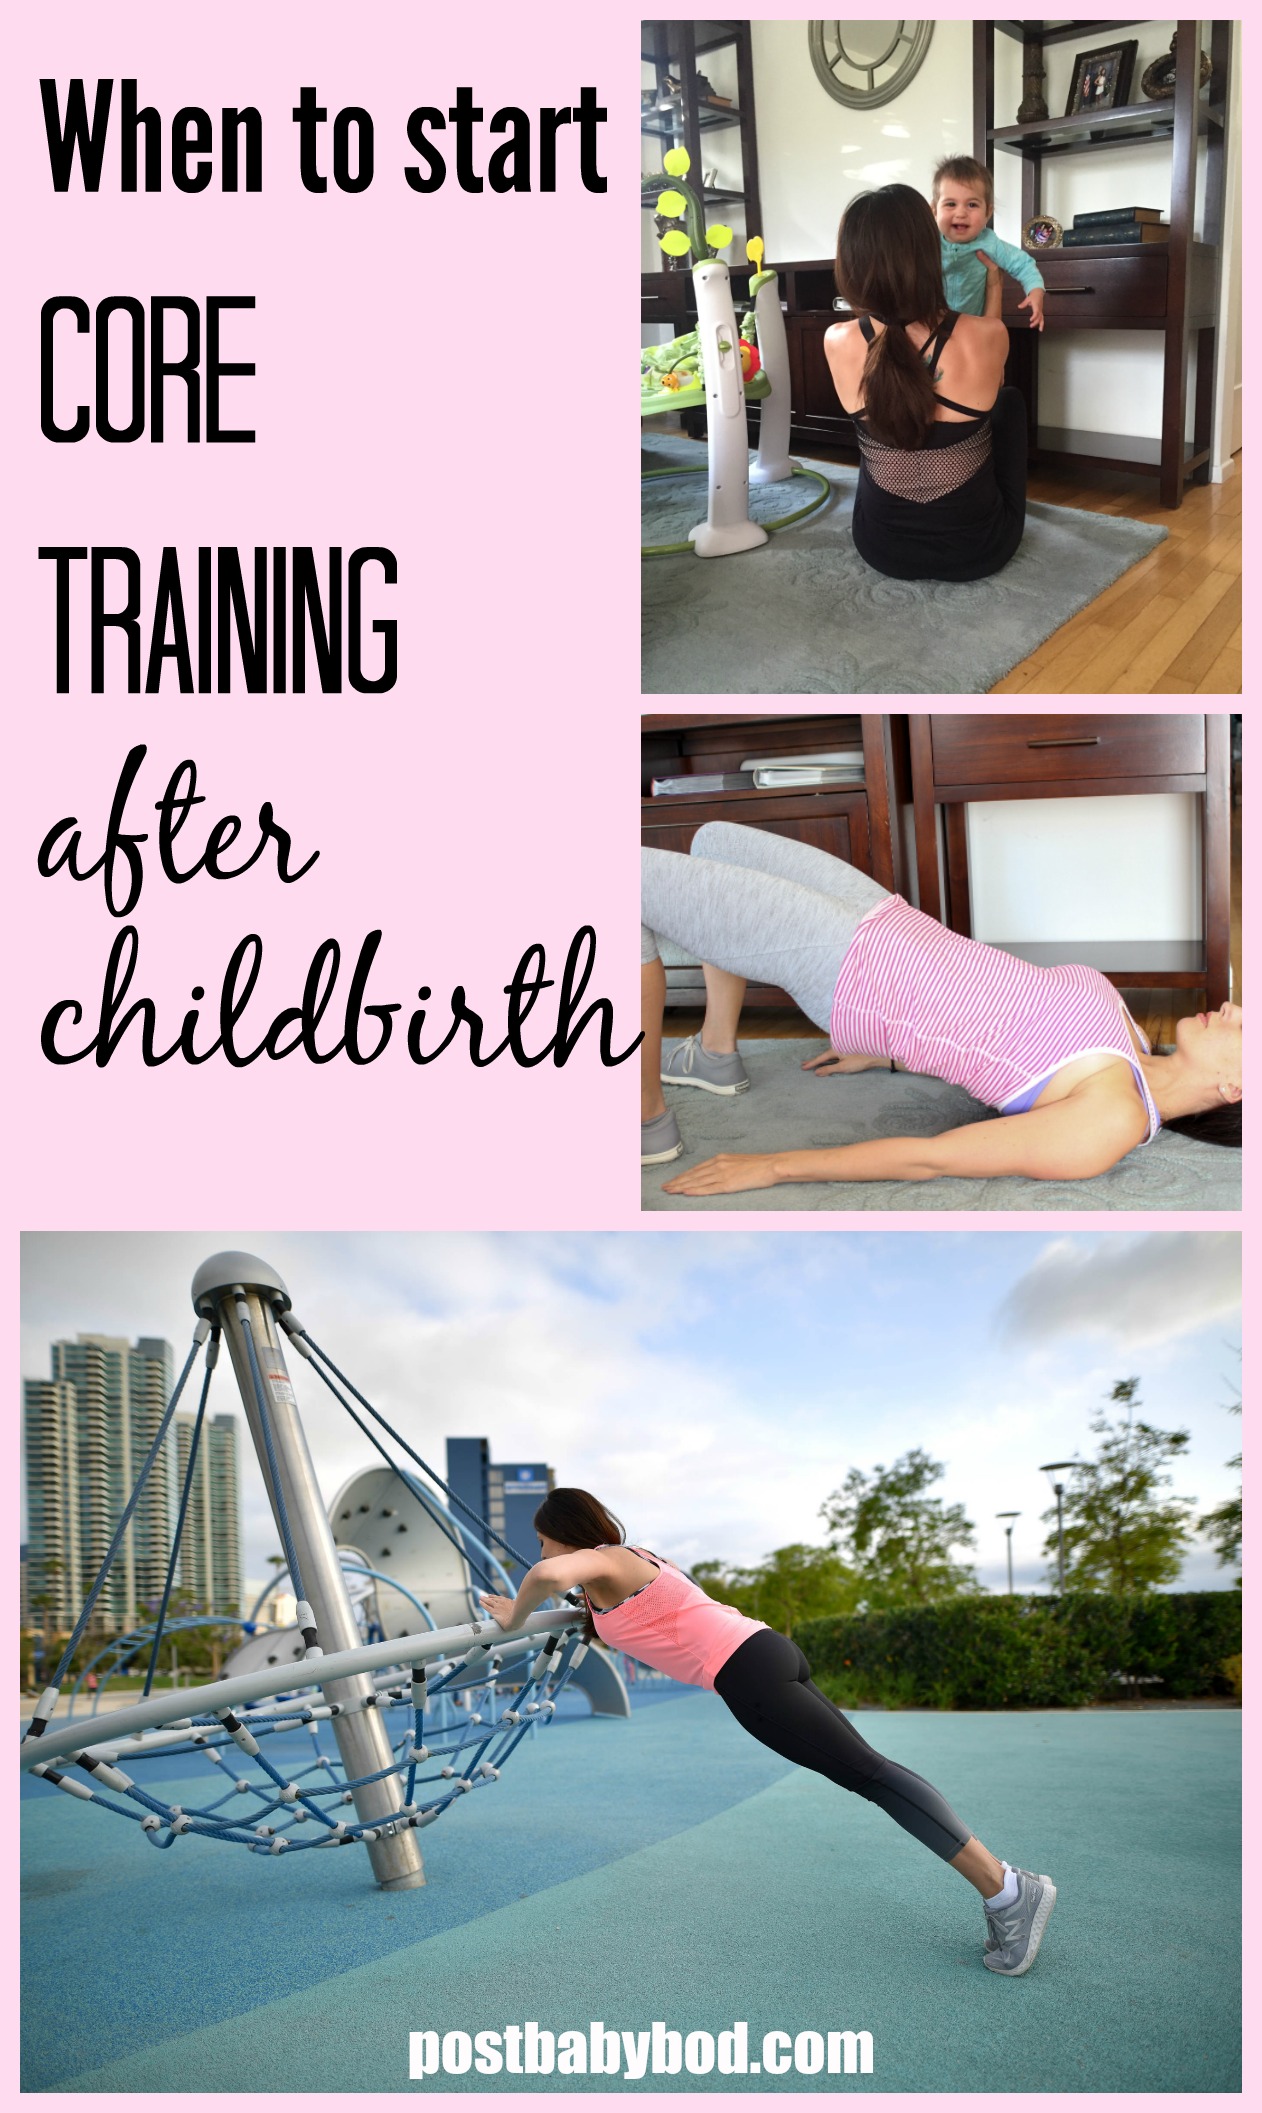 When to start core training after childbirth - Post Baby Bod